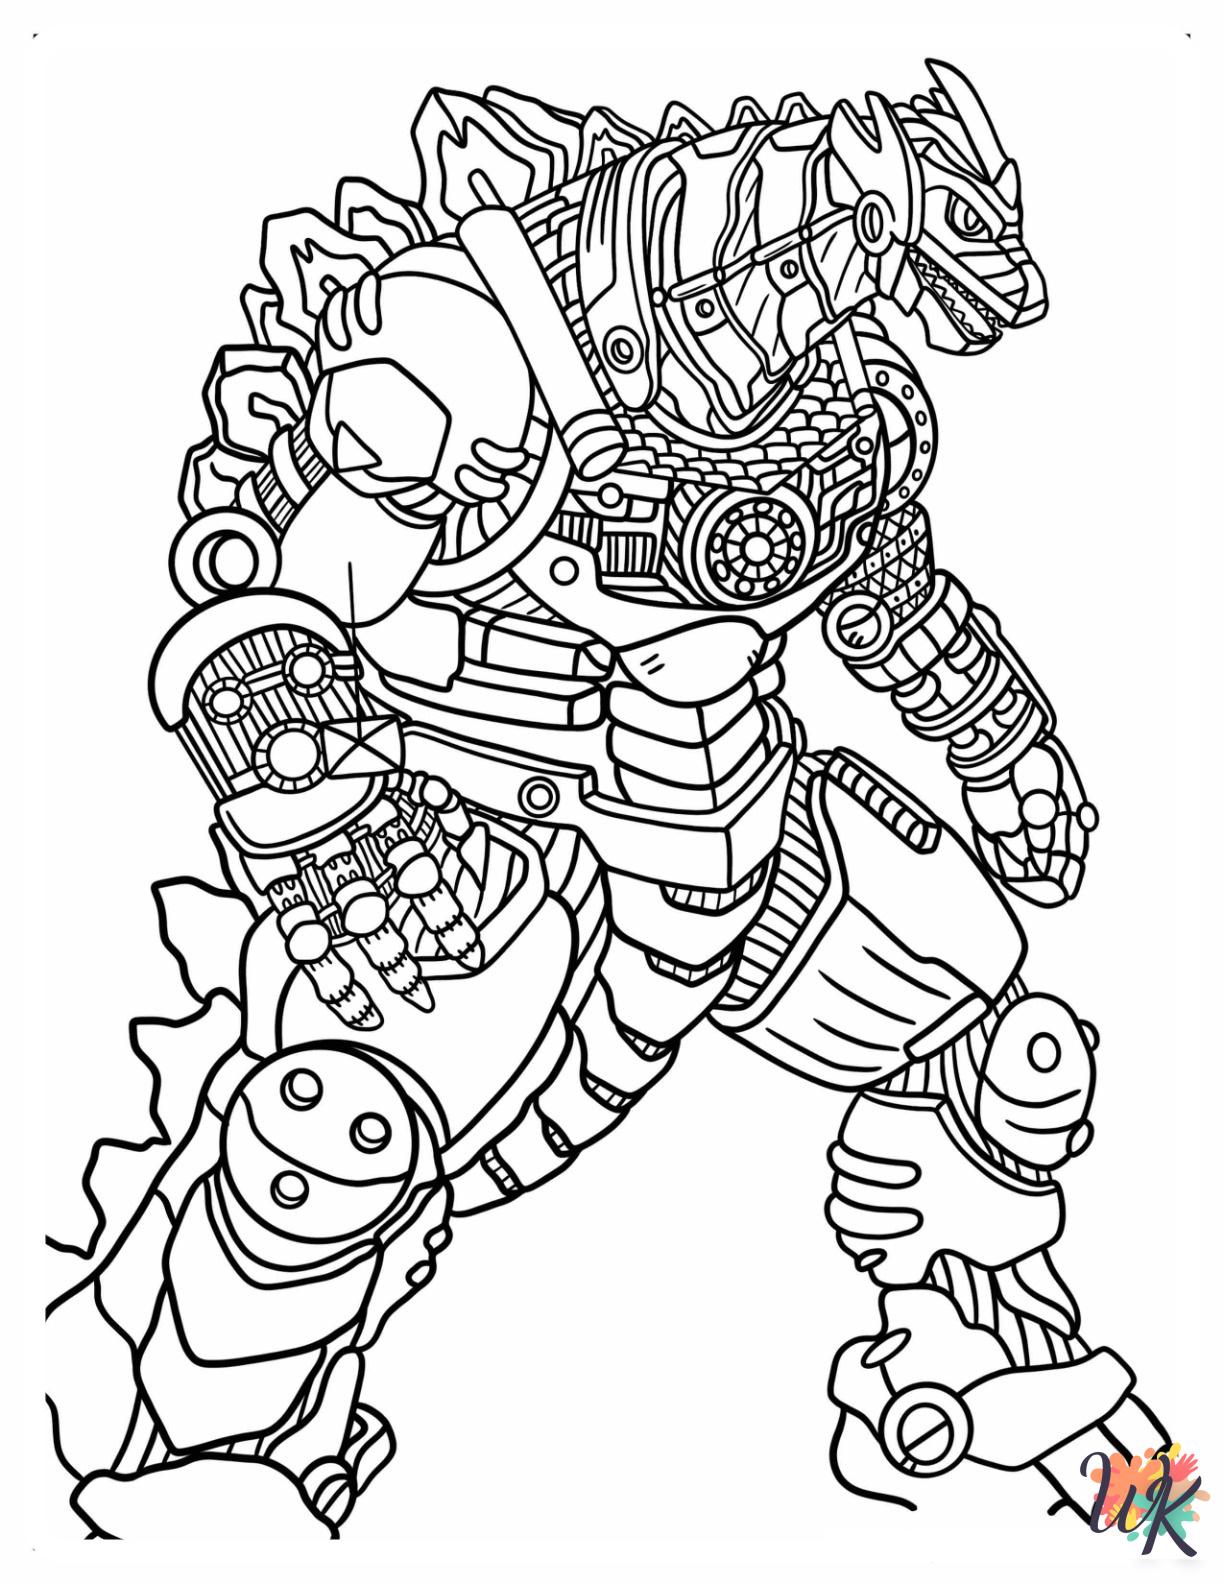 Godzilla cards coloring pages